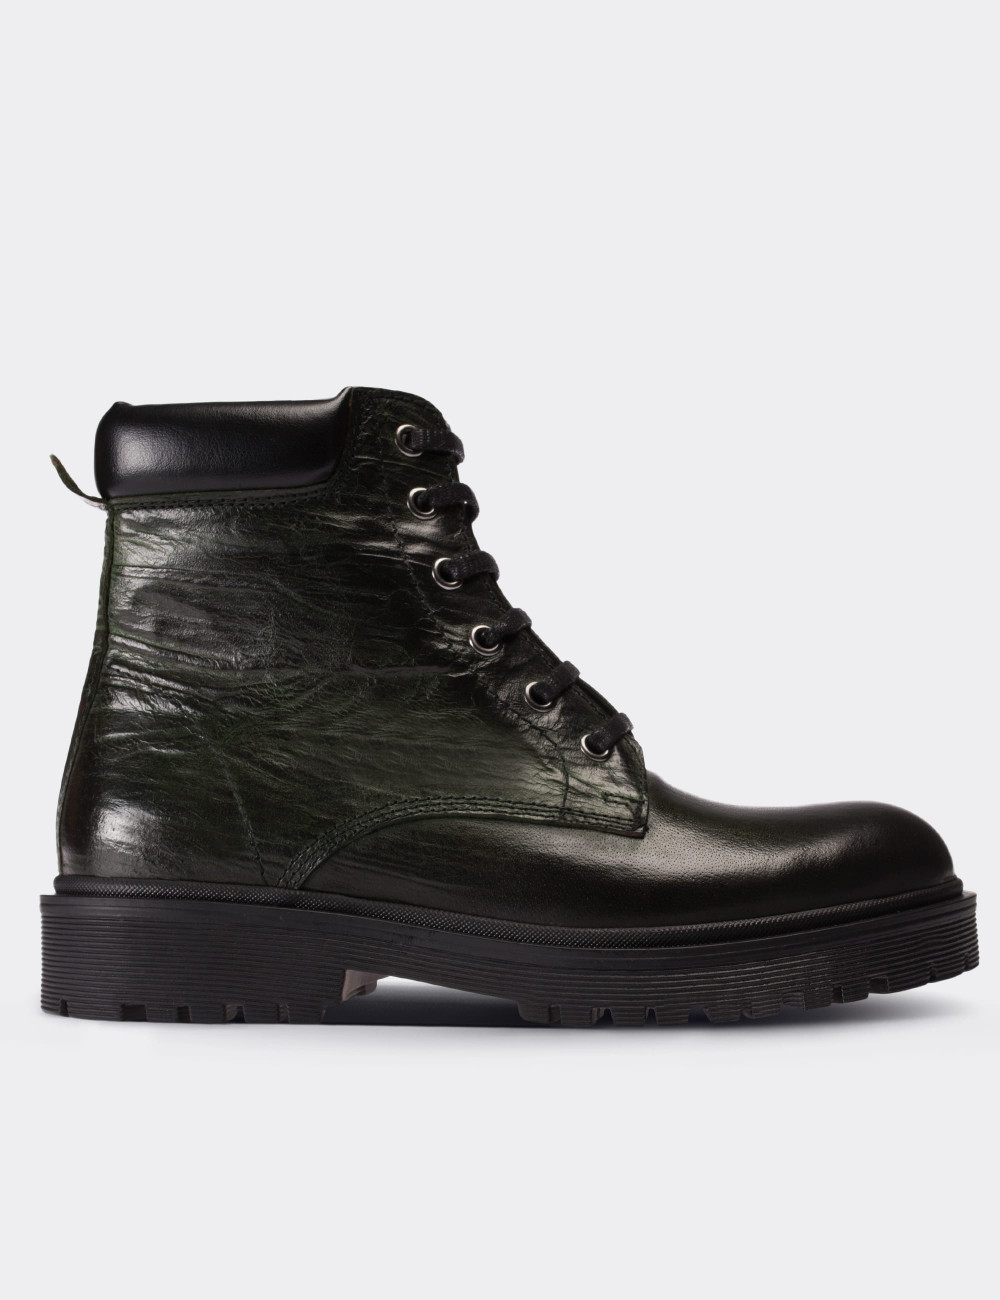 Green  Leather Boots - 01808ZYSLC01